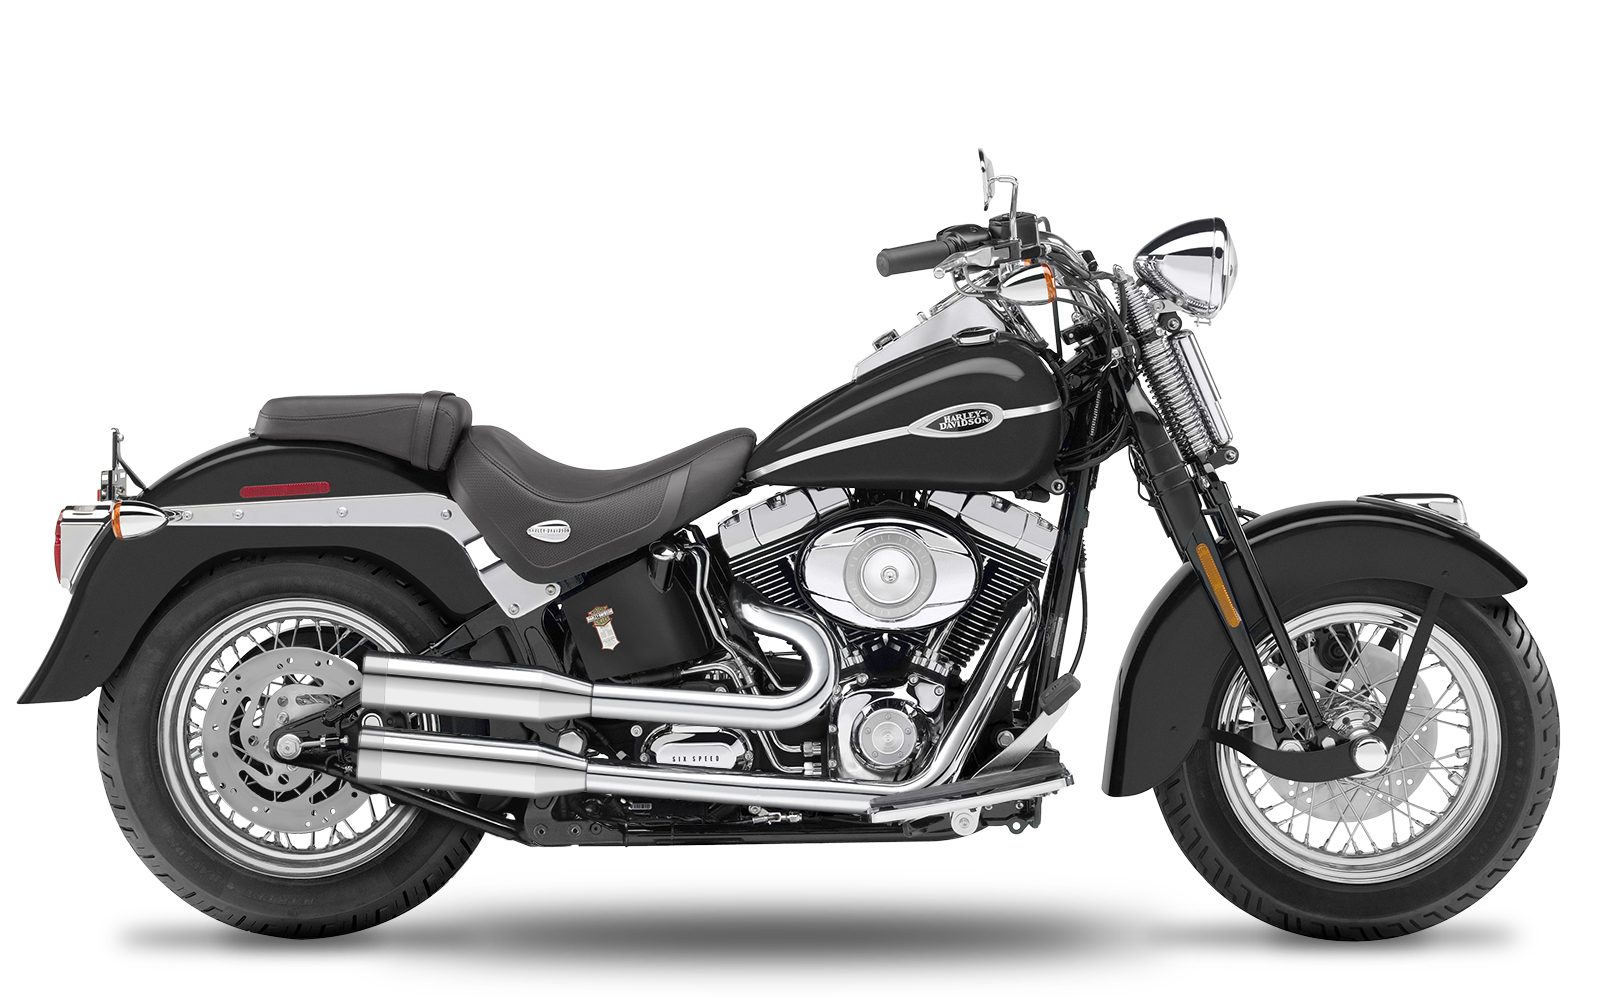 CRUISER/SOFTAIL - Springer Classic - TC96 - 2007-2011 - Complete systems adjustable